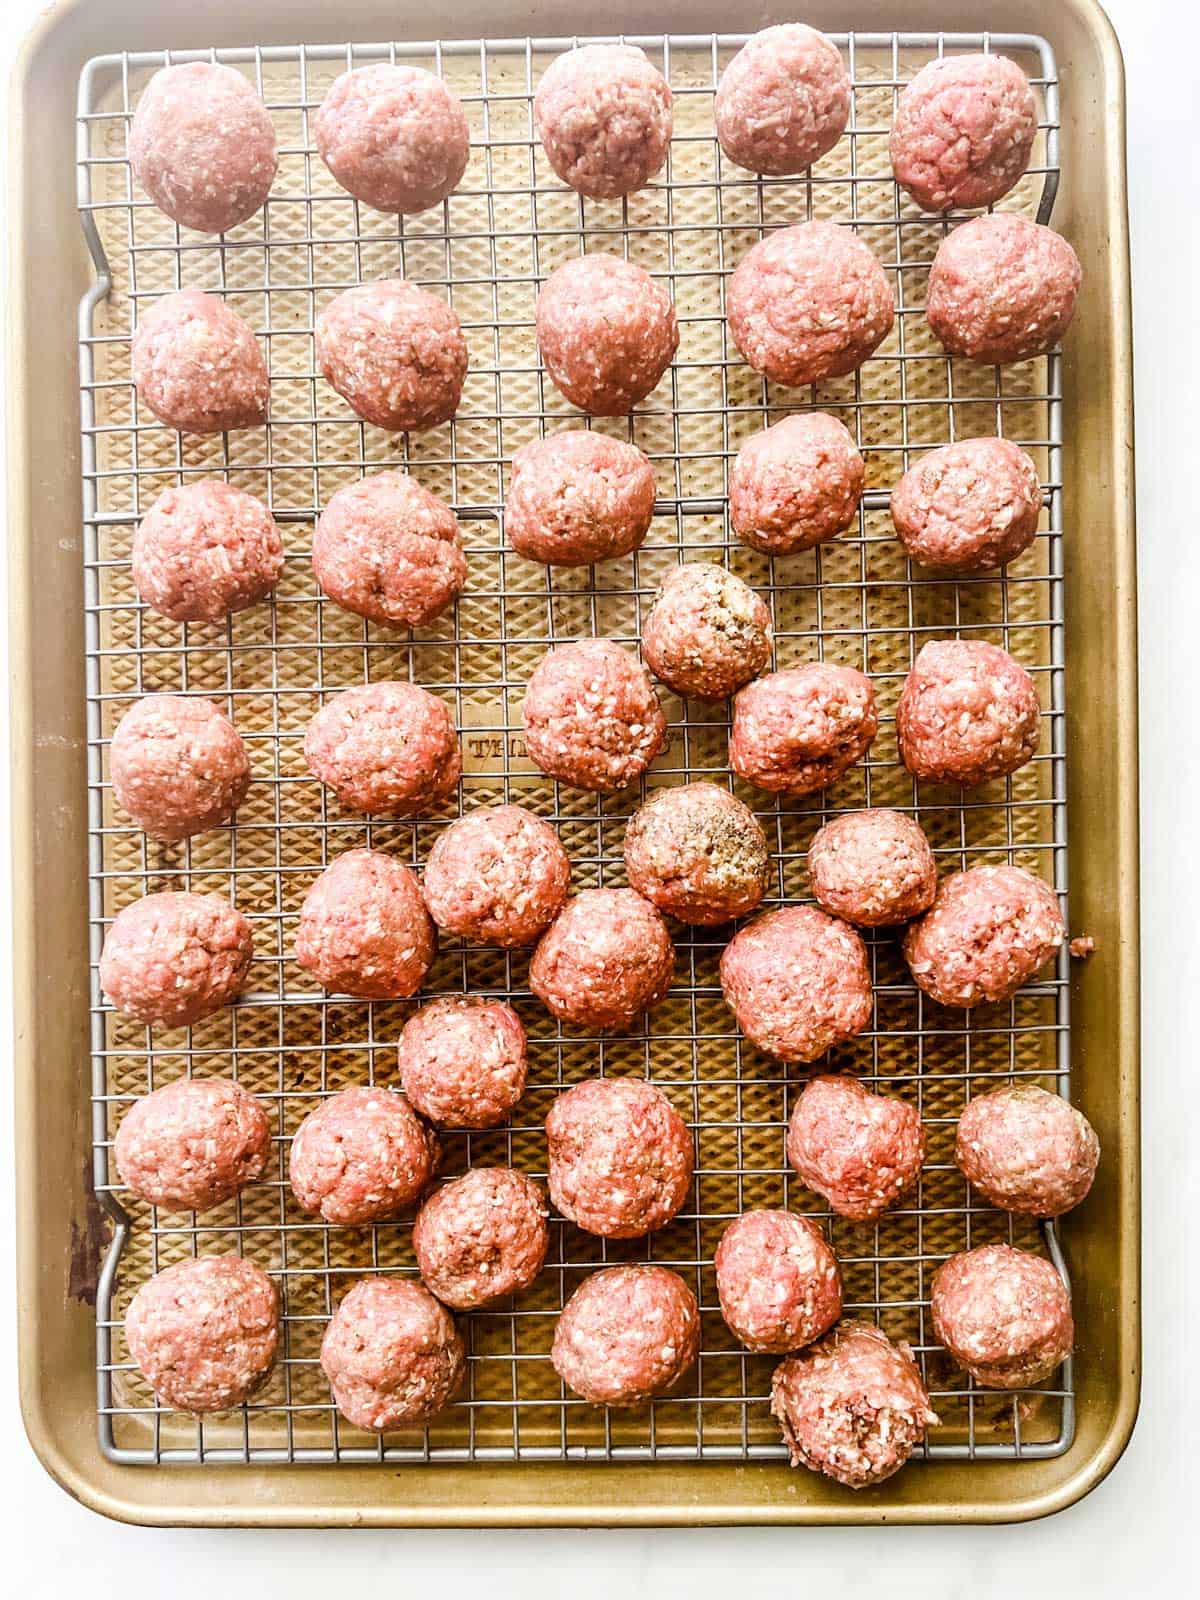 Photo of meatballs on a wire rack set on top of a baking sheet.